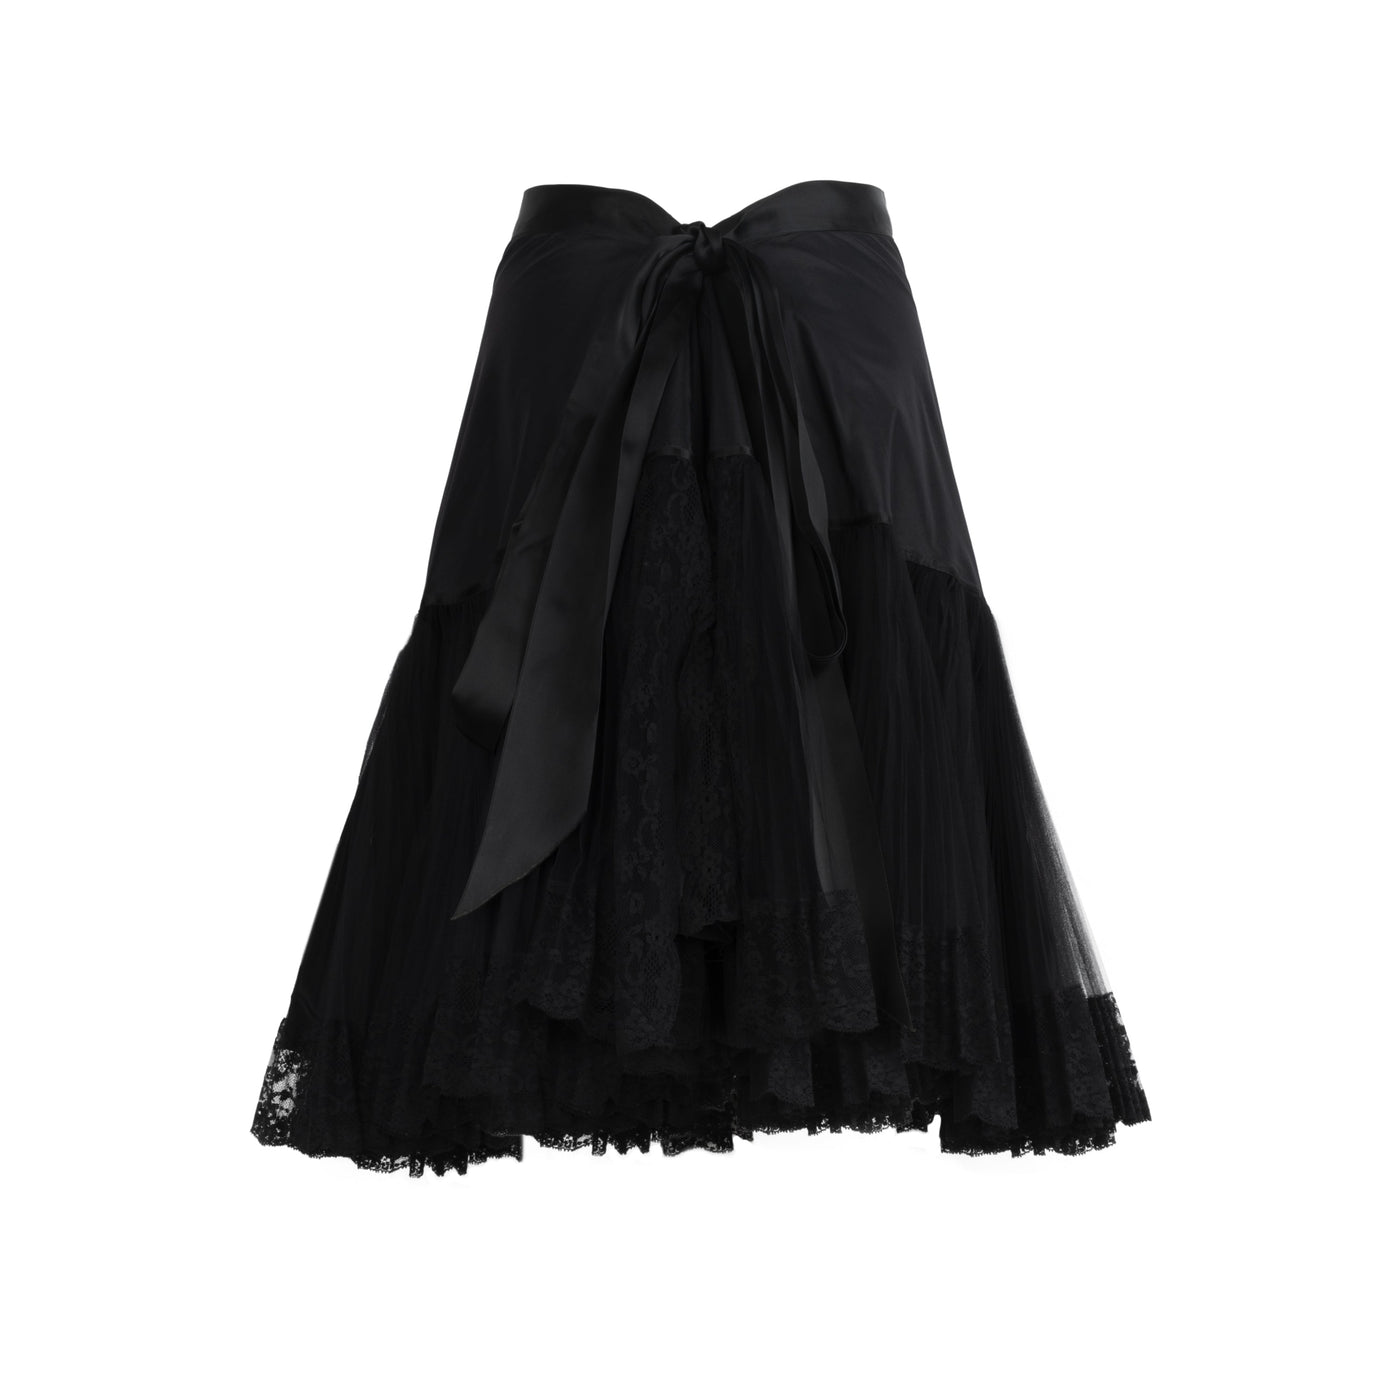 Gianfranco Ferré black skirt. Long skirt decorated with lace and tulle pre-owned